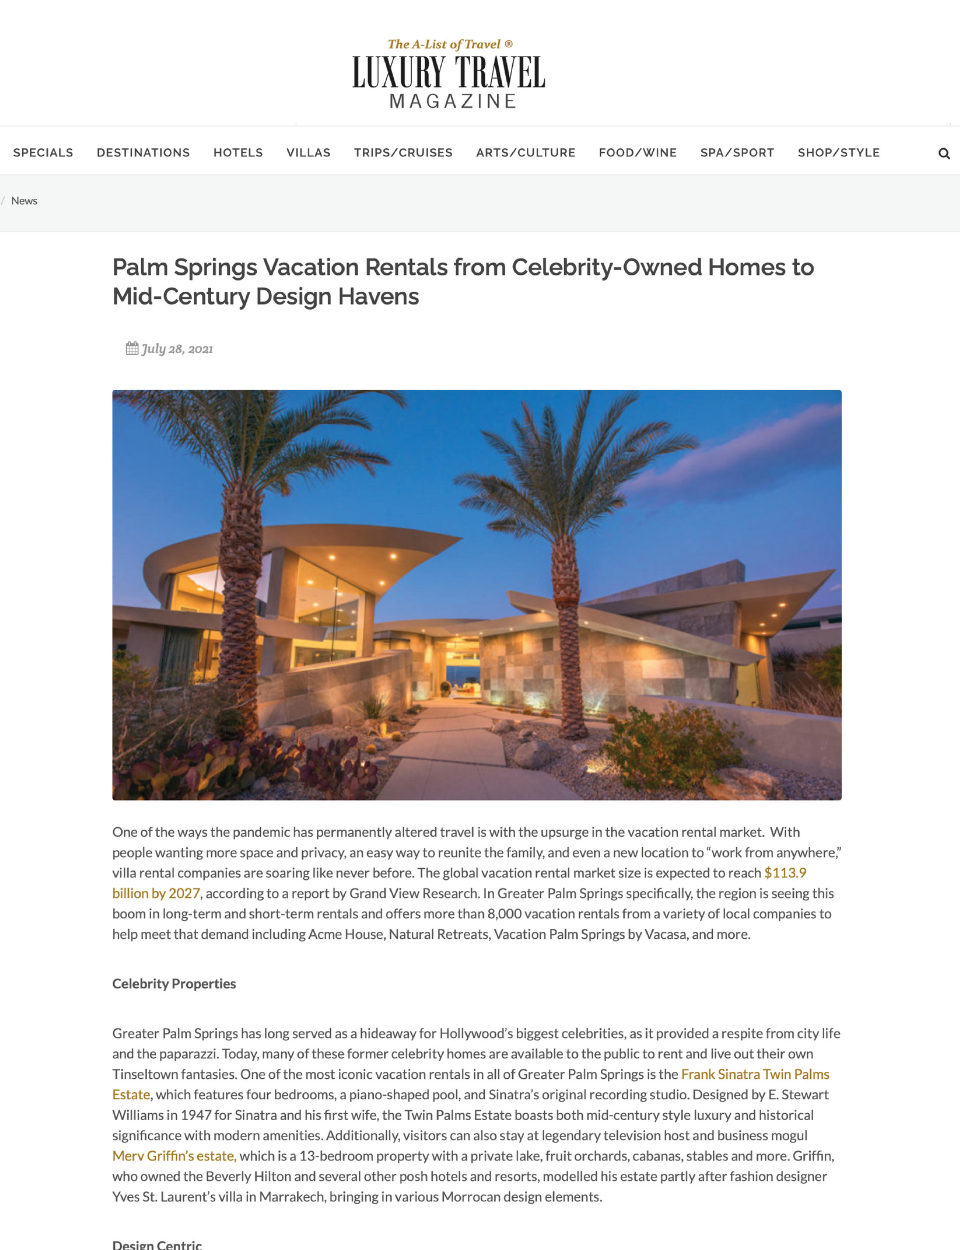 a luxury travel magazine article about palm springs vacation rentals from celebrity-owned homes to mid-century design havens